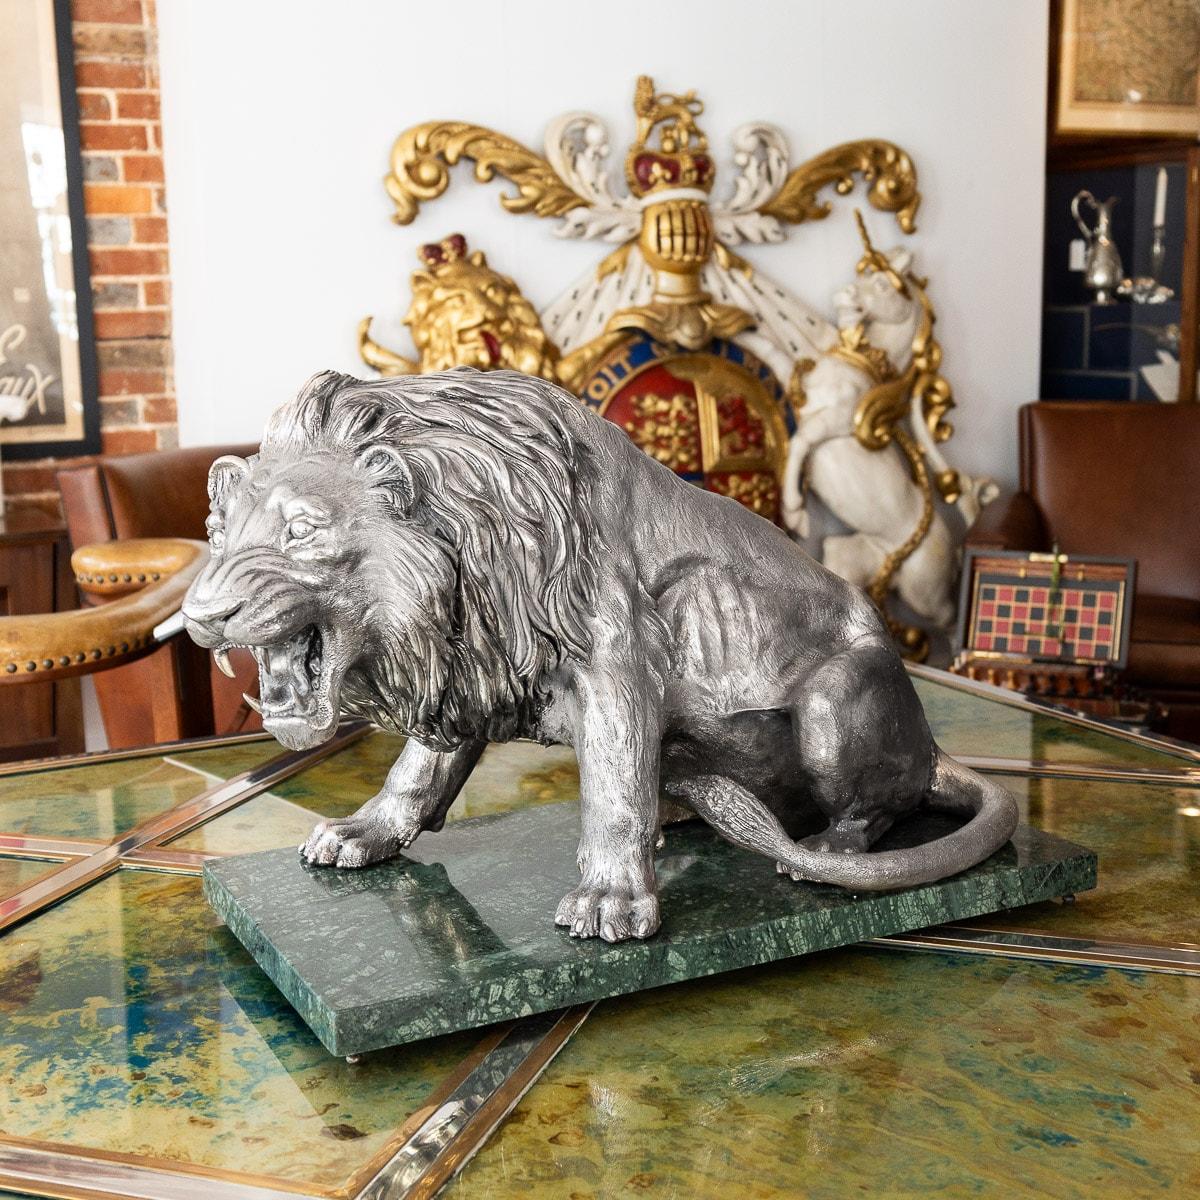 Stunning 20th century Italian solid silver monumental statue of a lion on a marble base, beautifully modelled as a seated roaring lion, fitted on a rectangular green marble plinth. Hallmarked 925 (925 silver standard), 871 FI (Firenze), 1968 -